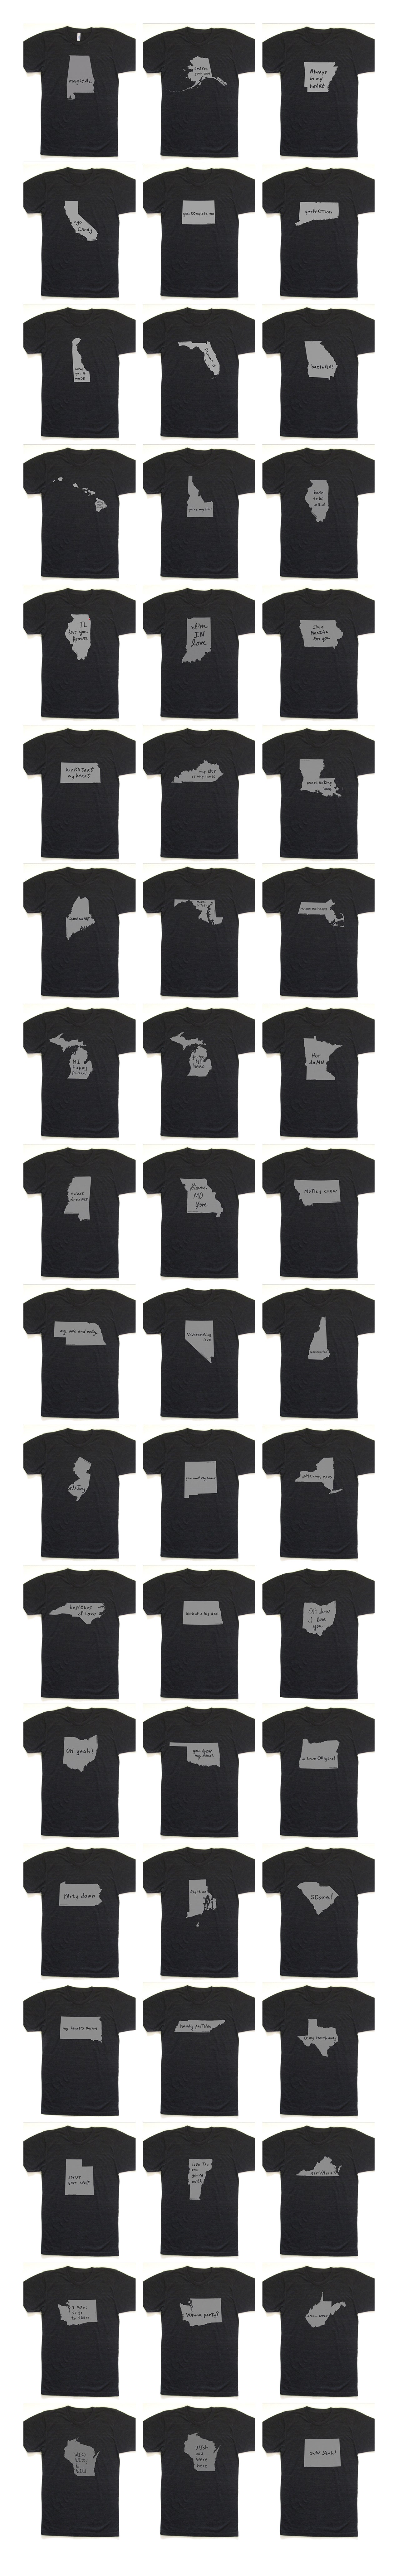 State of Mind Unisex Tee - All 50 states available